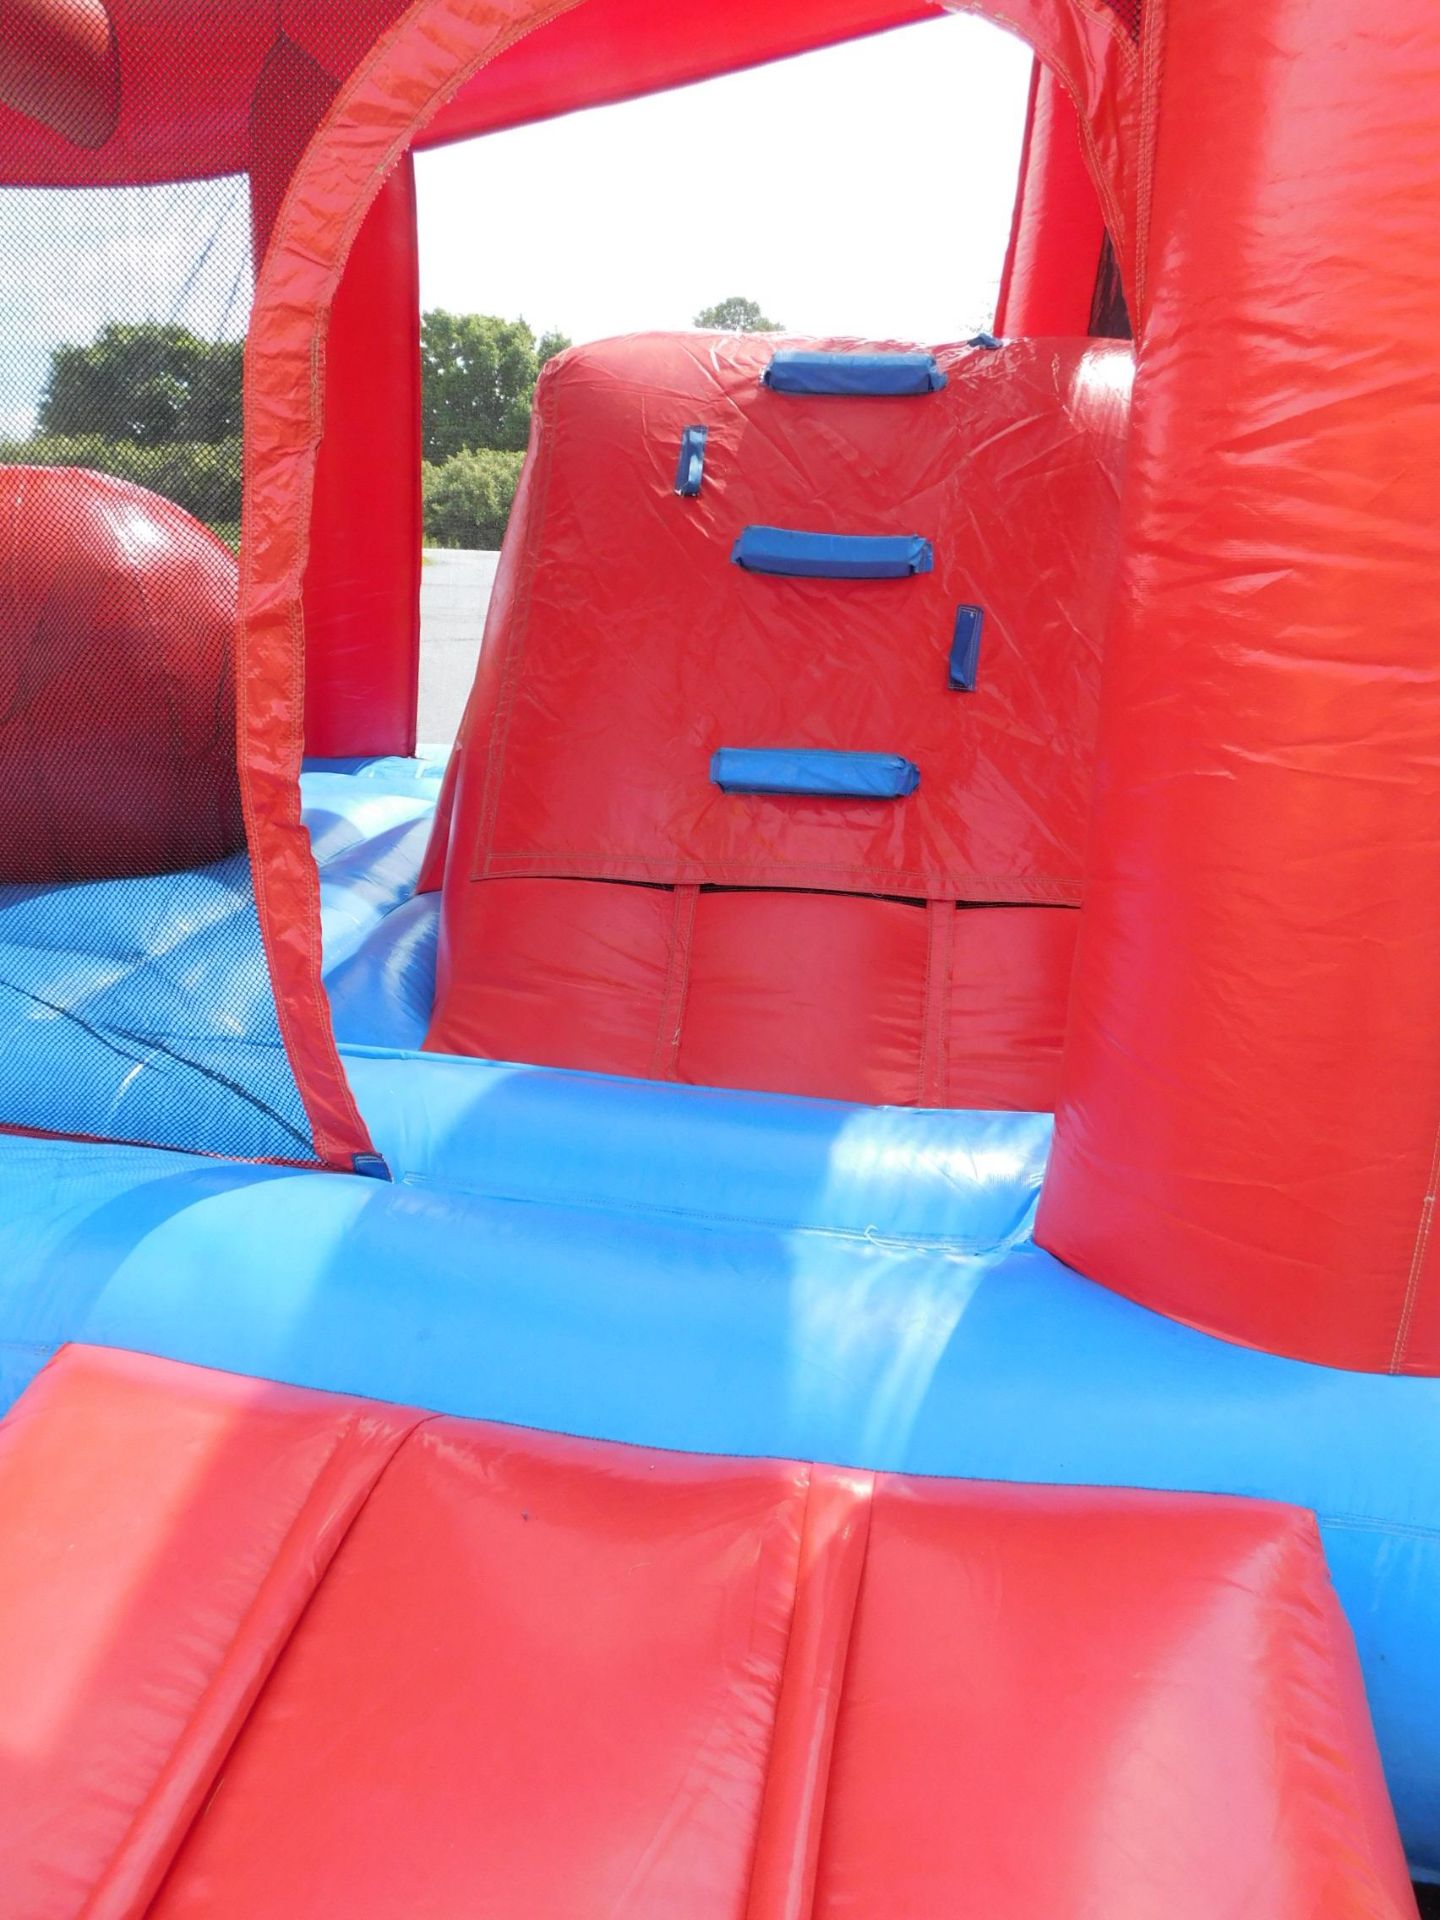 E-Z Inflatables Wiped Out Obstacle Course, 18'WX42'LX13'H #88 - Image 8 of 22